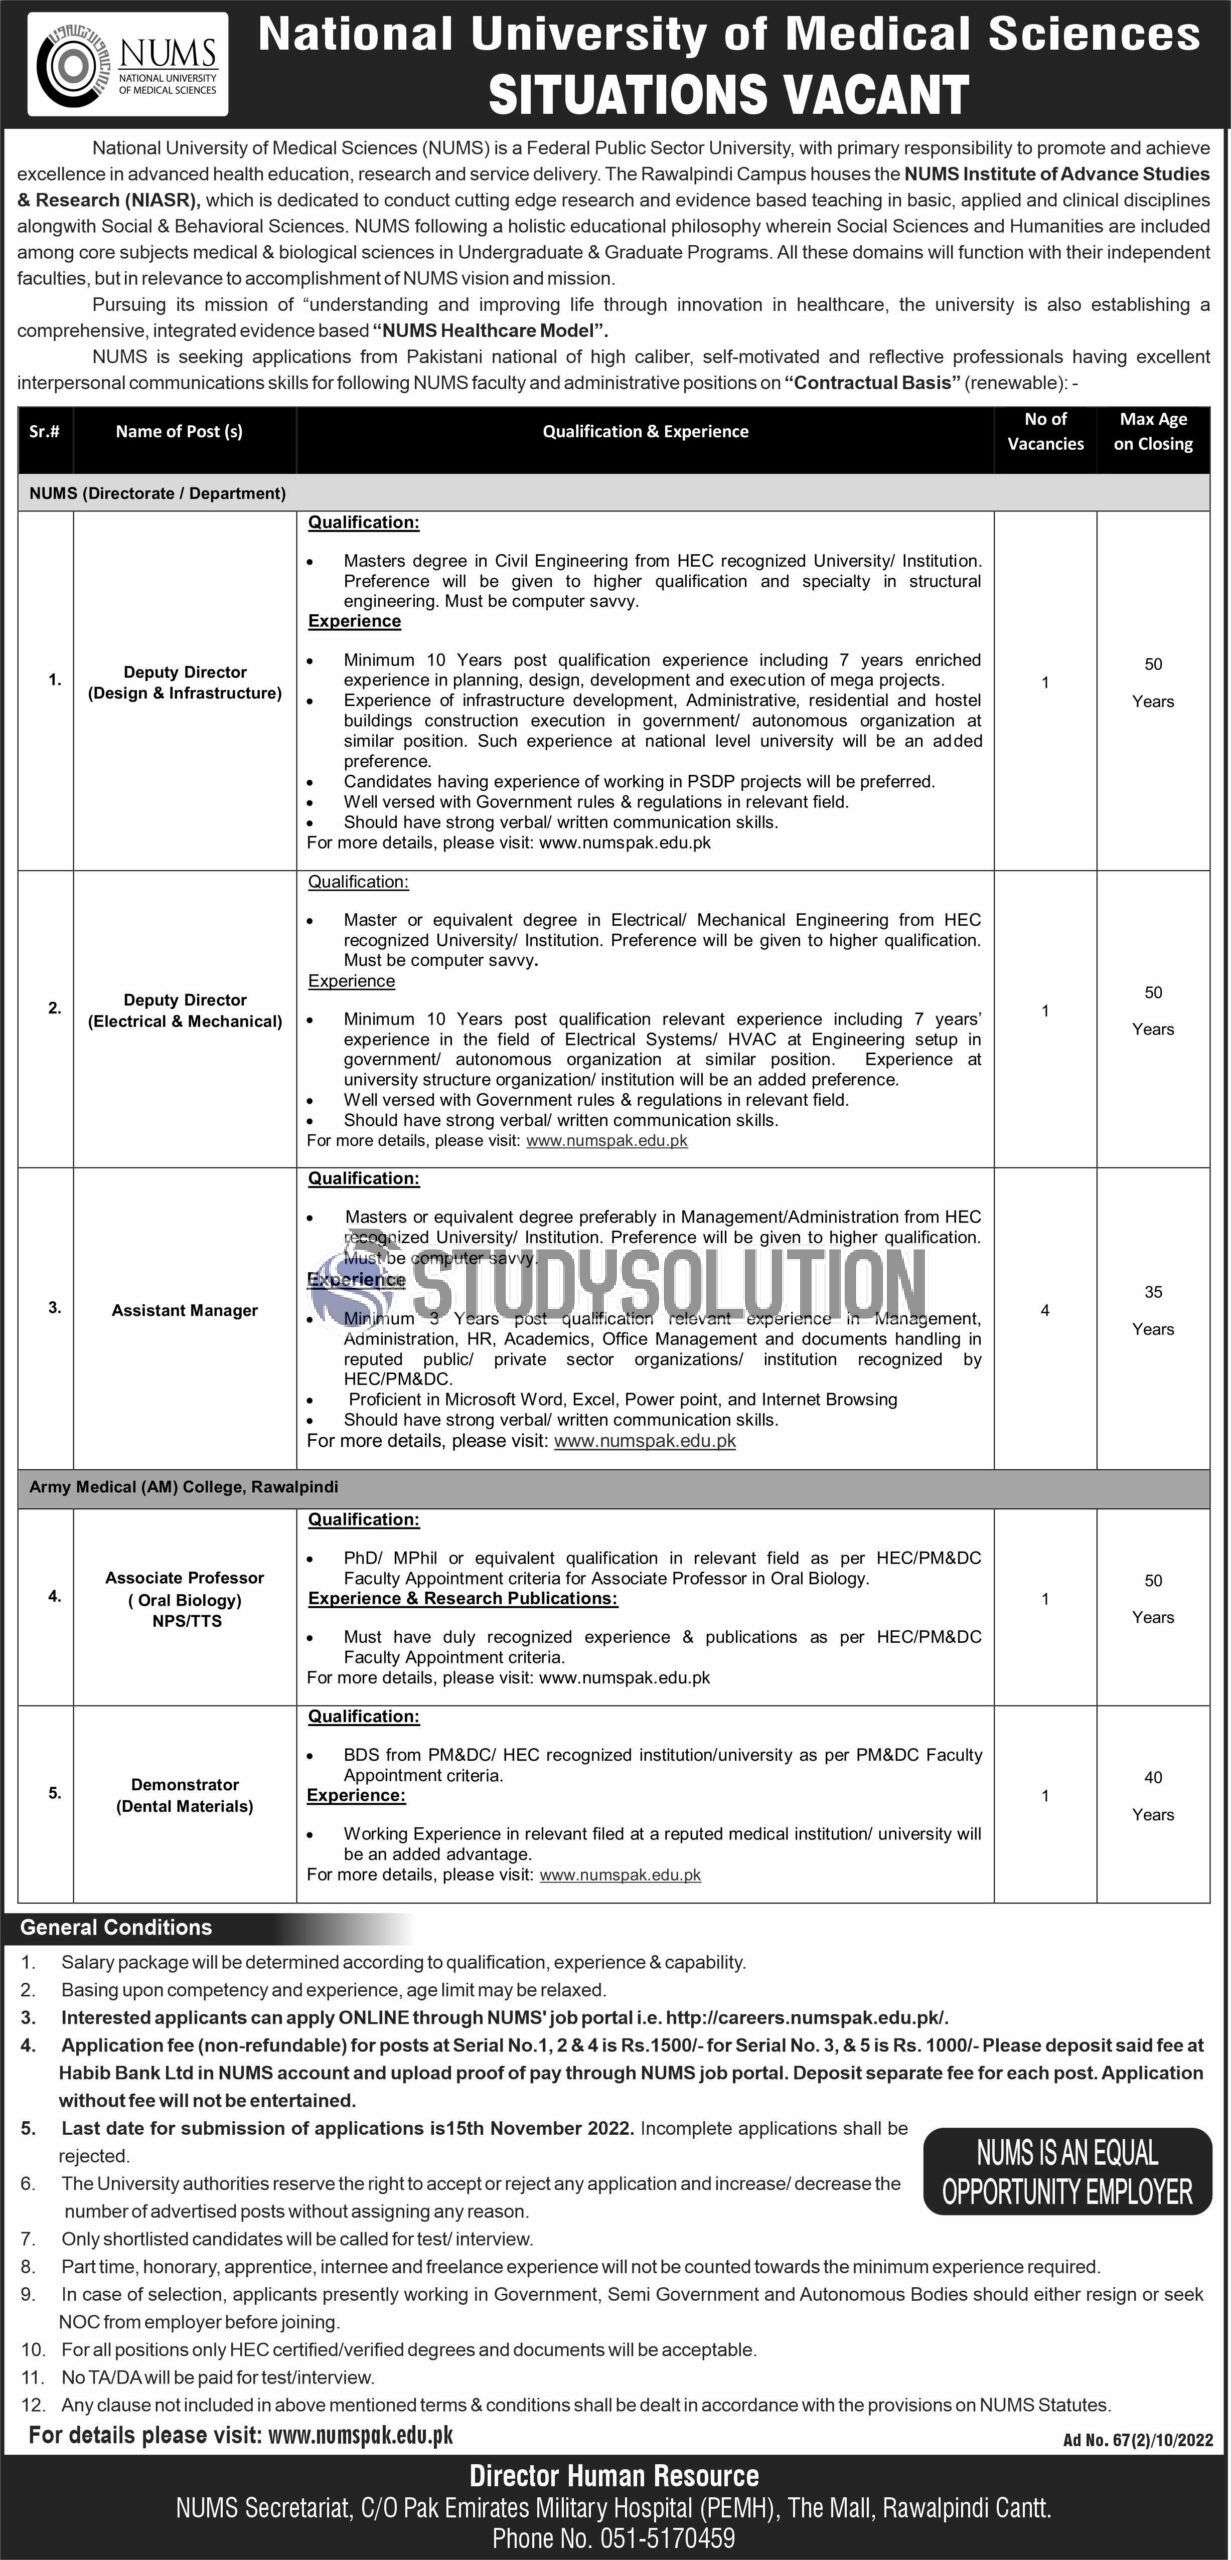 National University of Medical Sciences NUMS Jobs 2022 Latest